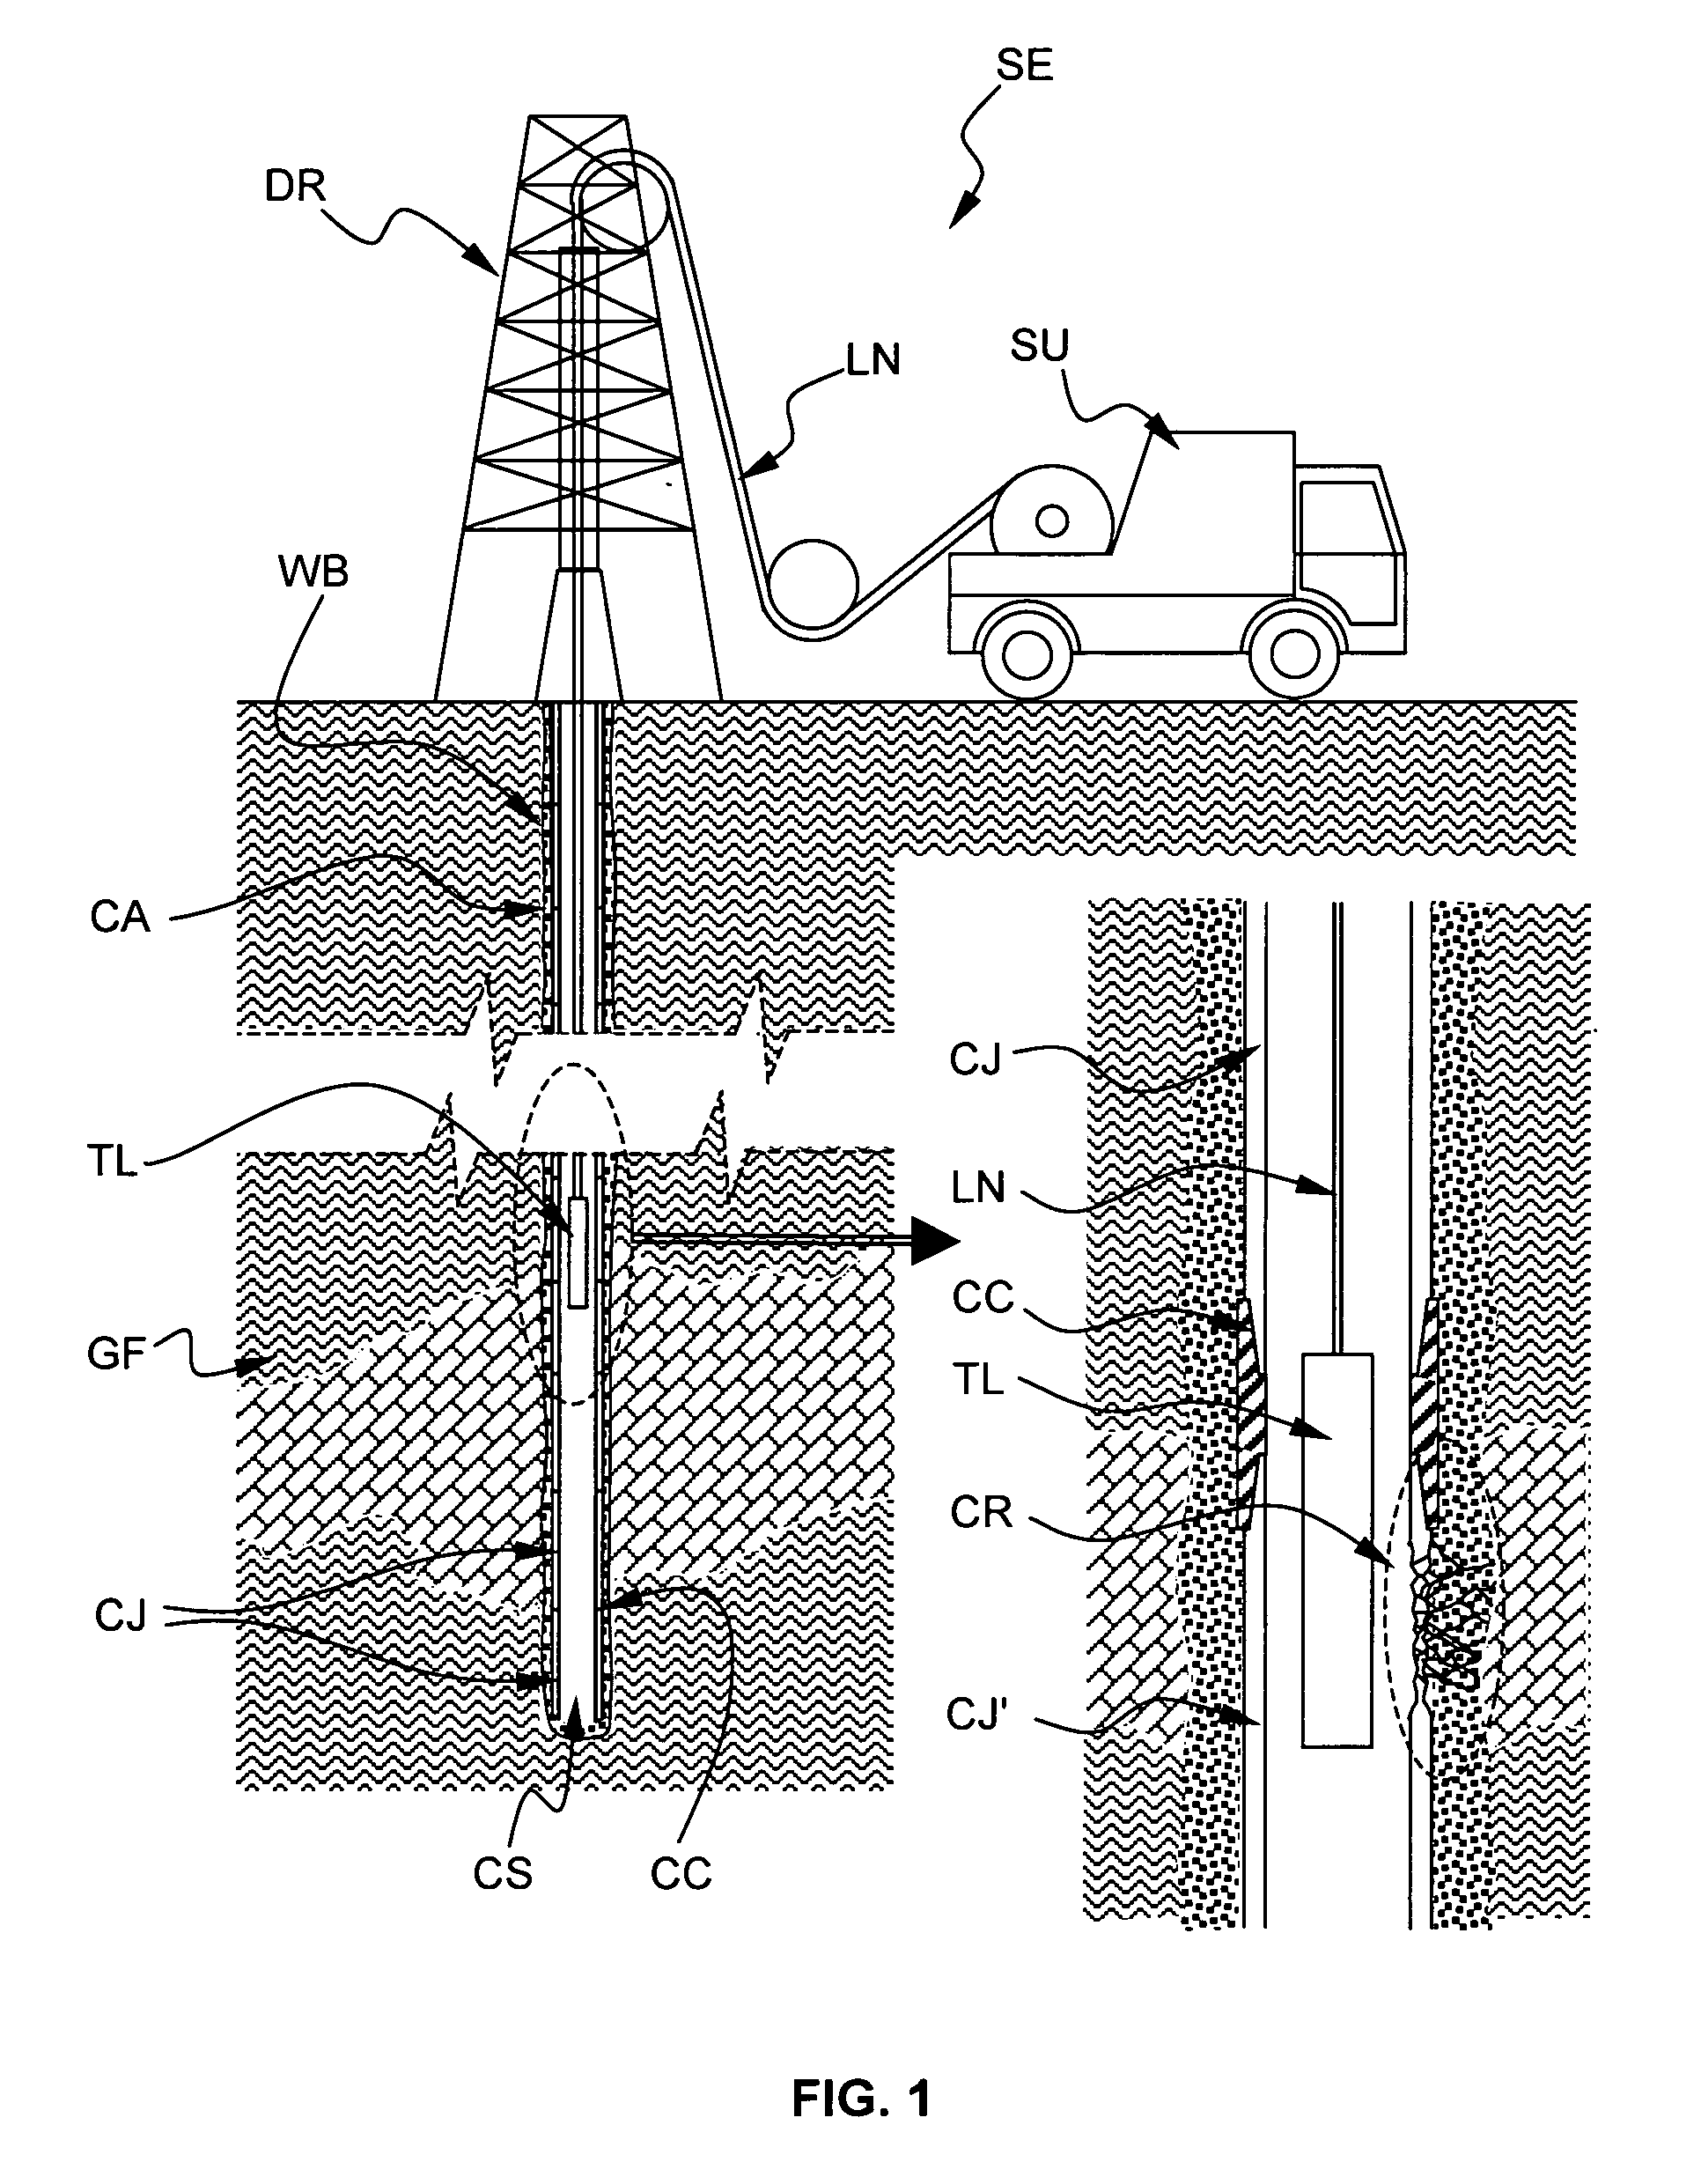 Method for electromagnetically measuring physical parameters of a pipe